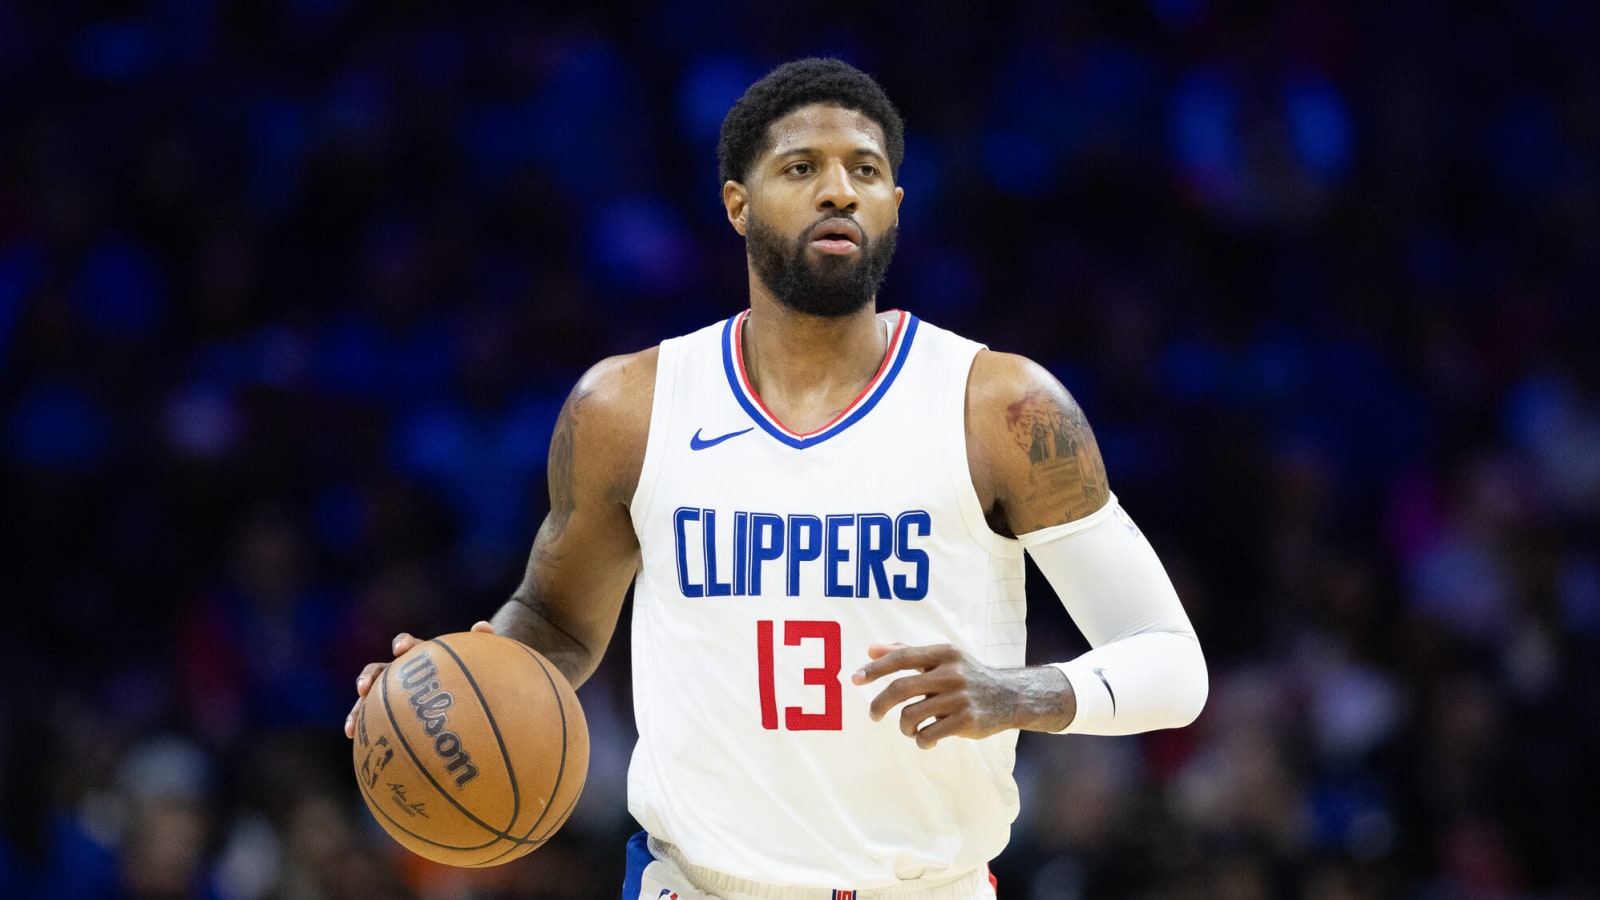 ESPN's Brian Windhorst shares prediction about Paul George landing spot